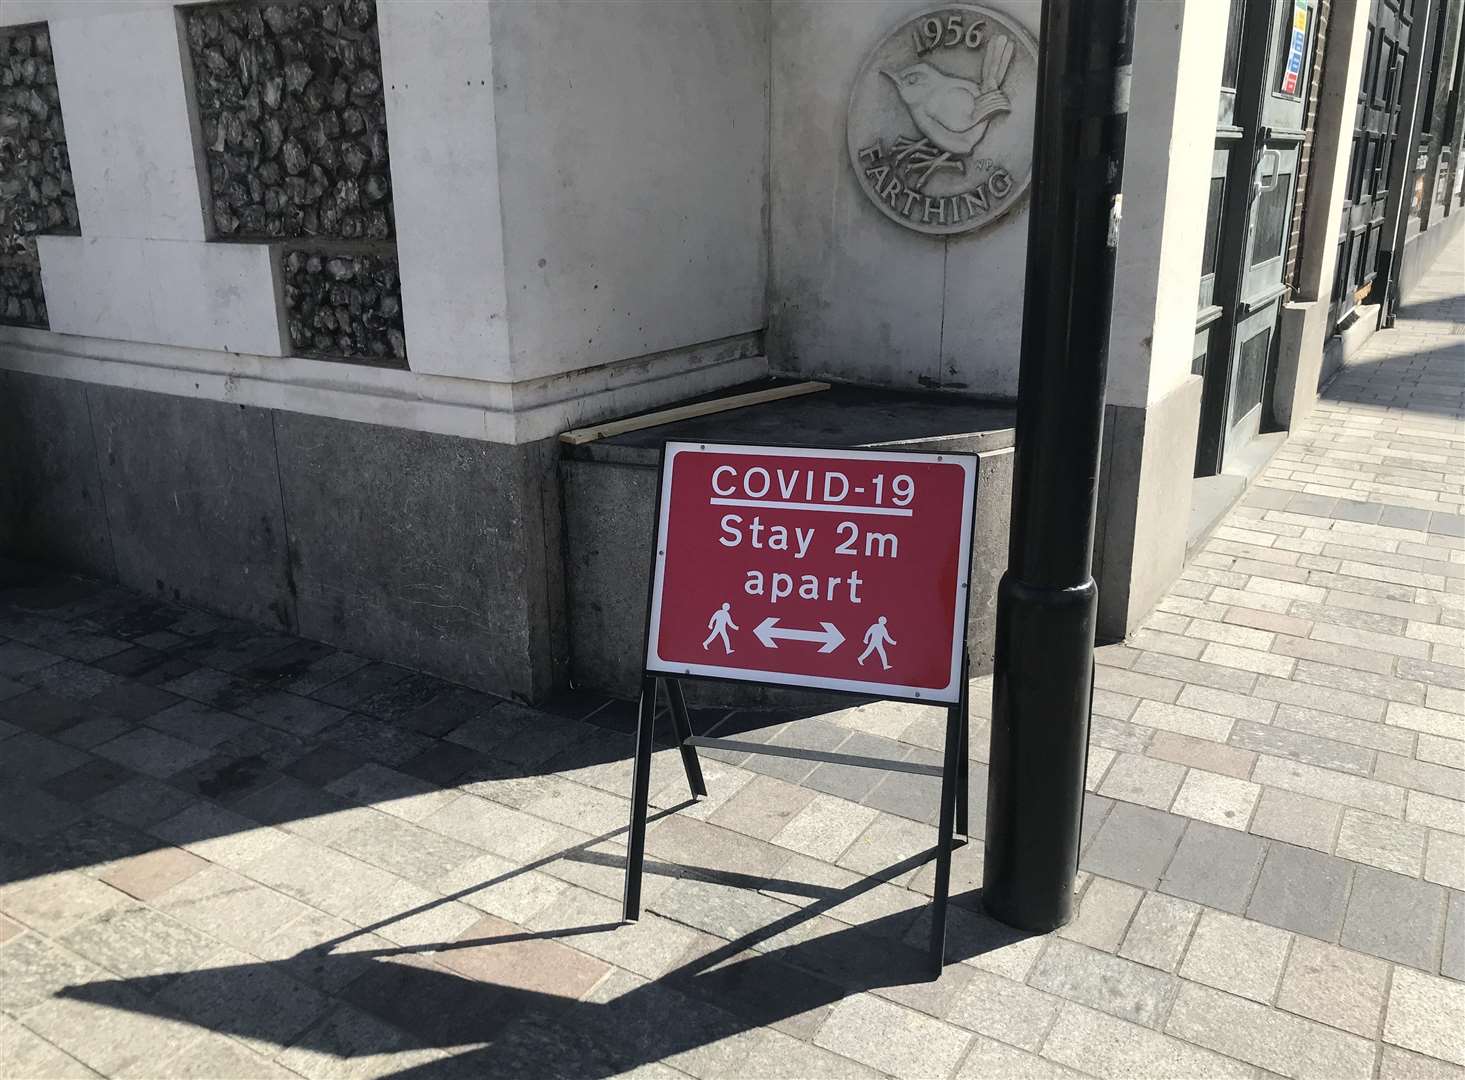 Signs advise shoppers returning to Maidstone town centre to follow social distancing practices in a bid to limit spread of coronavirus